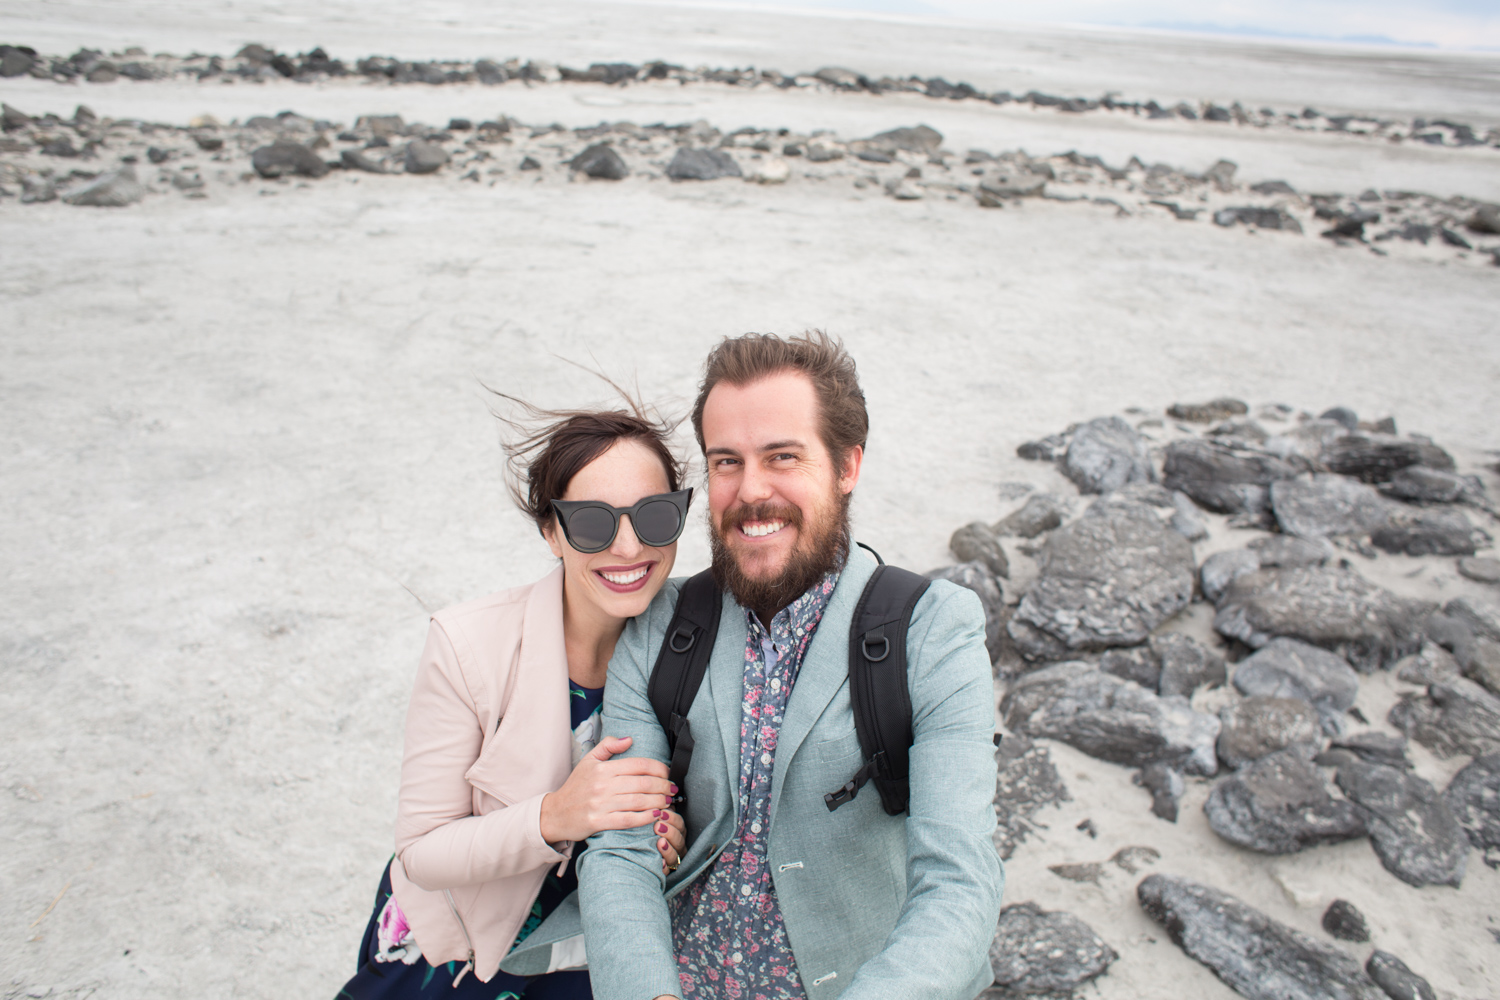 Everything you need to know about the Spiral Jetty